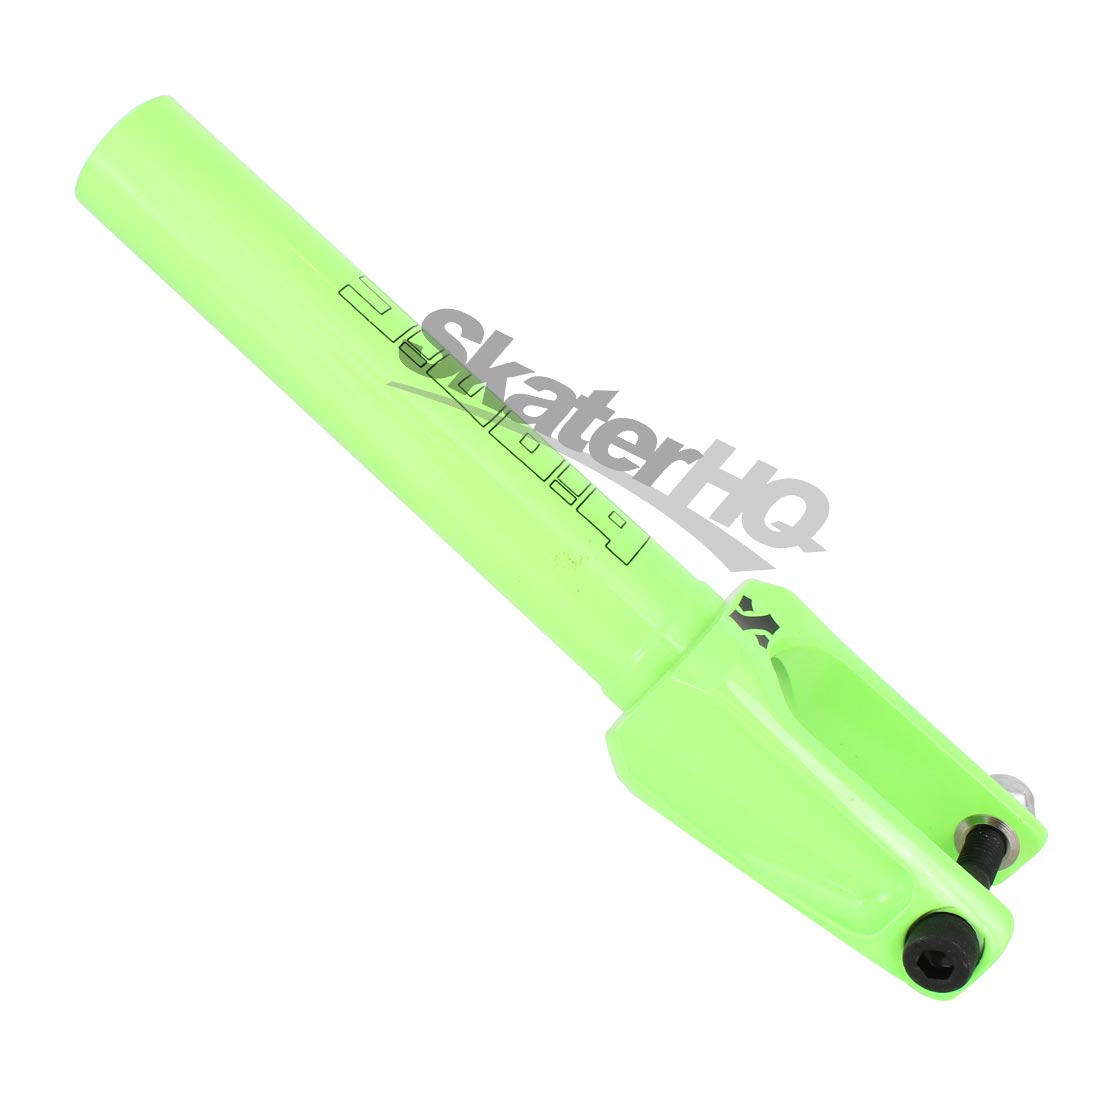 Sacrifice Bionic SCS Fork - Neon Green Scooter Forks